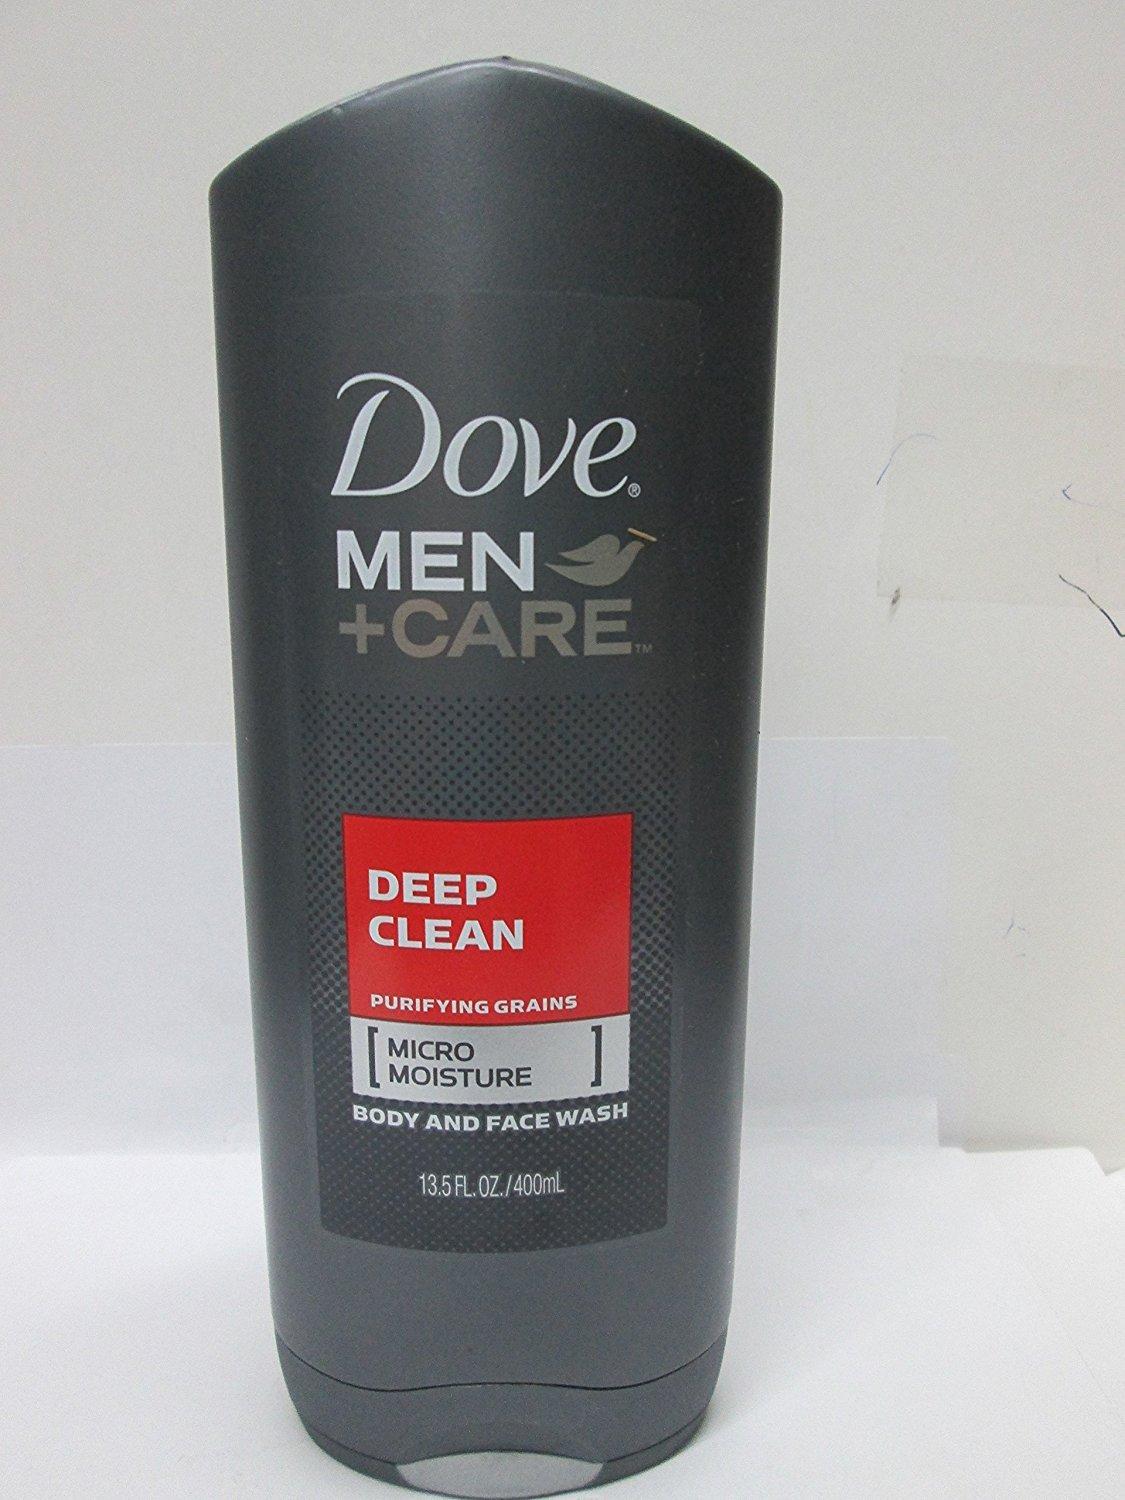 MEN+CARE Deep Clean Body and Face Wash